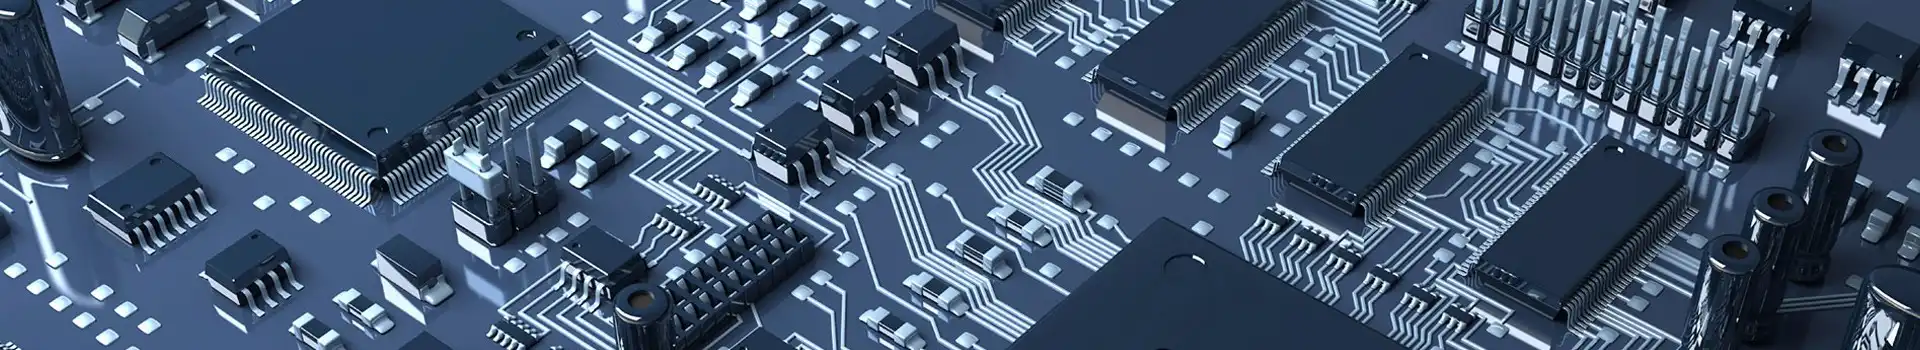 Electronic Product Design and PCB Introduction